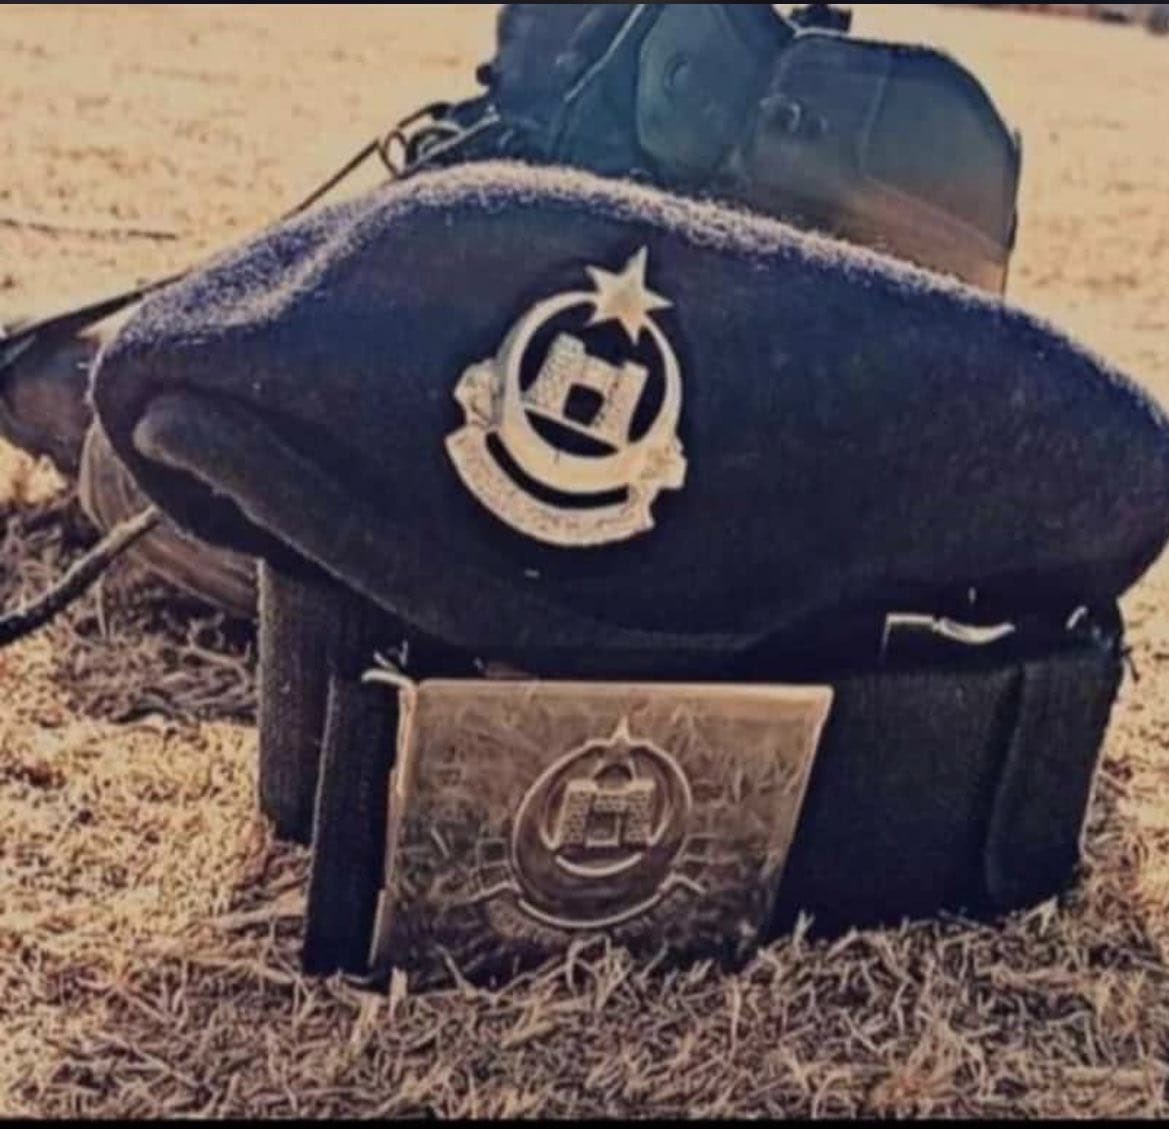 Heartbreaking to see the remnants of a police cap and belt recovered from the bomb blast in the police lines. Our thoughts are with those who lost their lives and their loved ones. #Policelivesmatter #PeshawarBlast”
#Peshawarunderattack 
 #PeshawarAttack